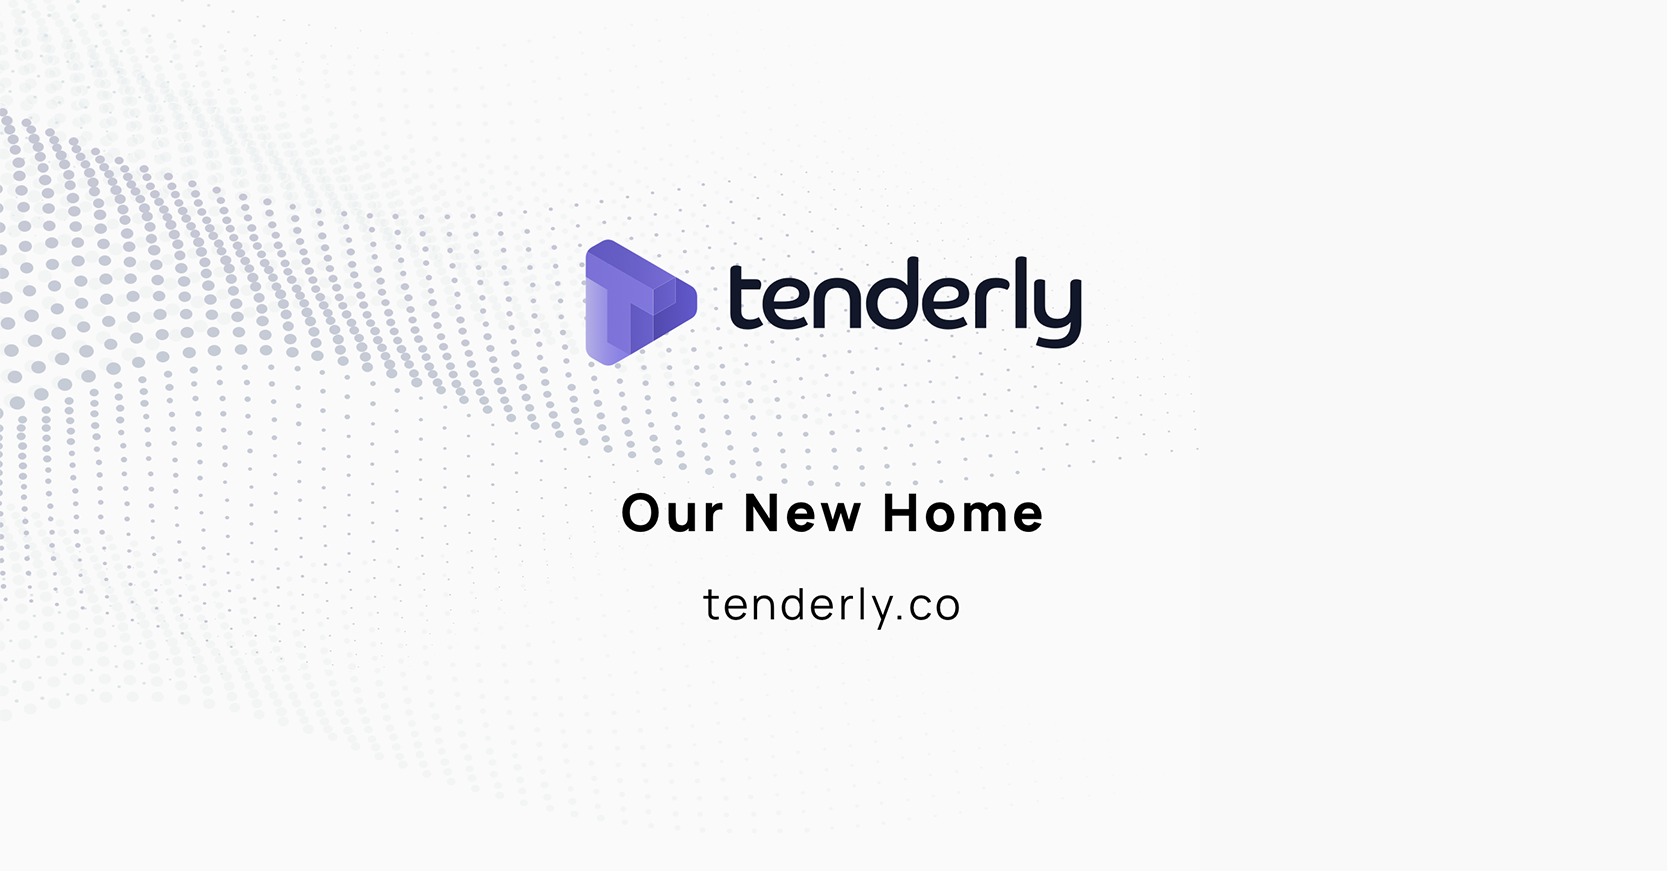 More Than a Dev Tool: Tenderly Has a New Home